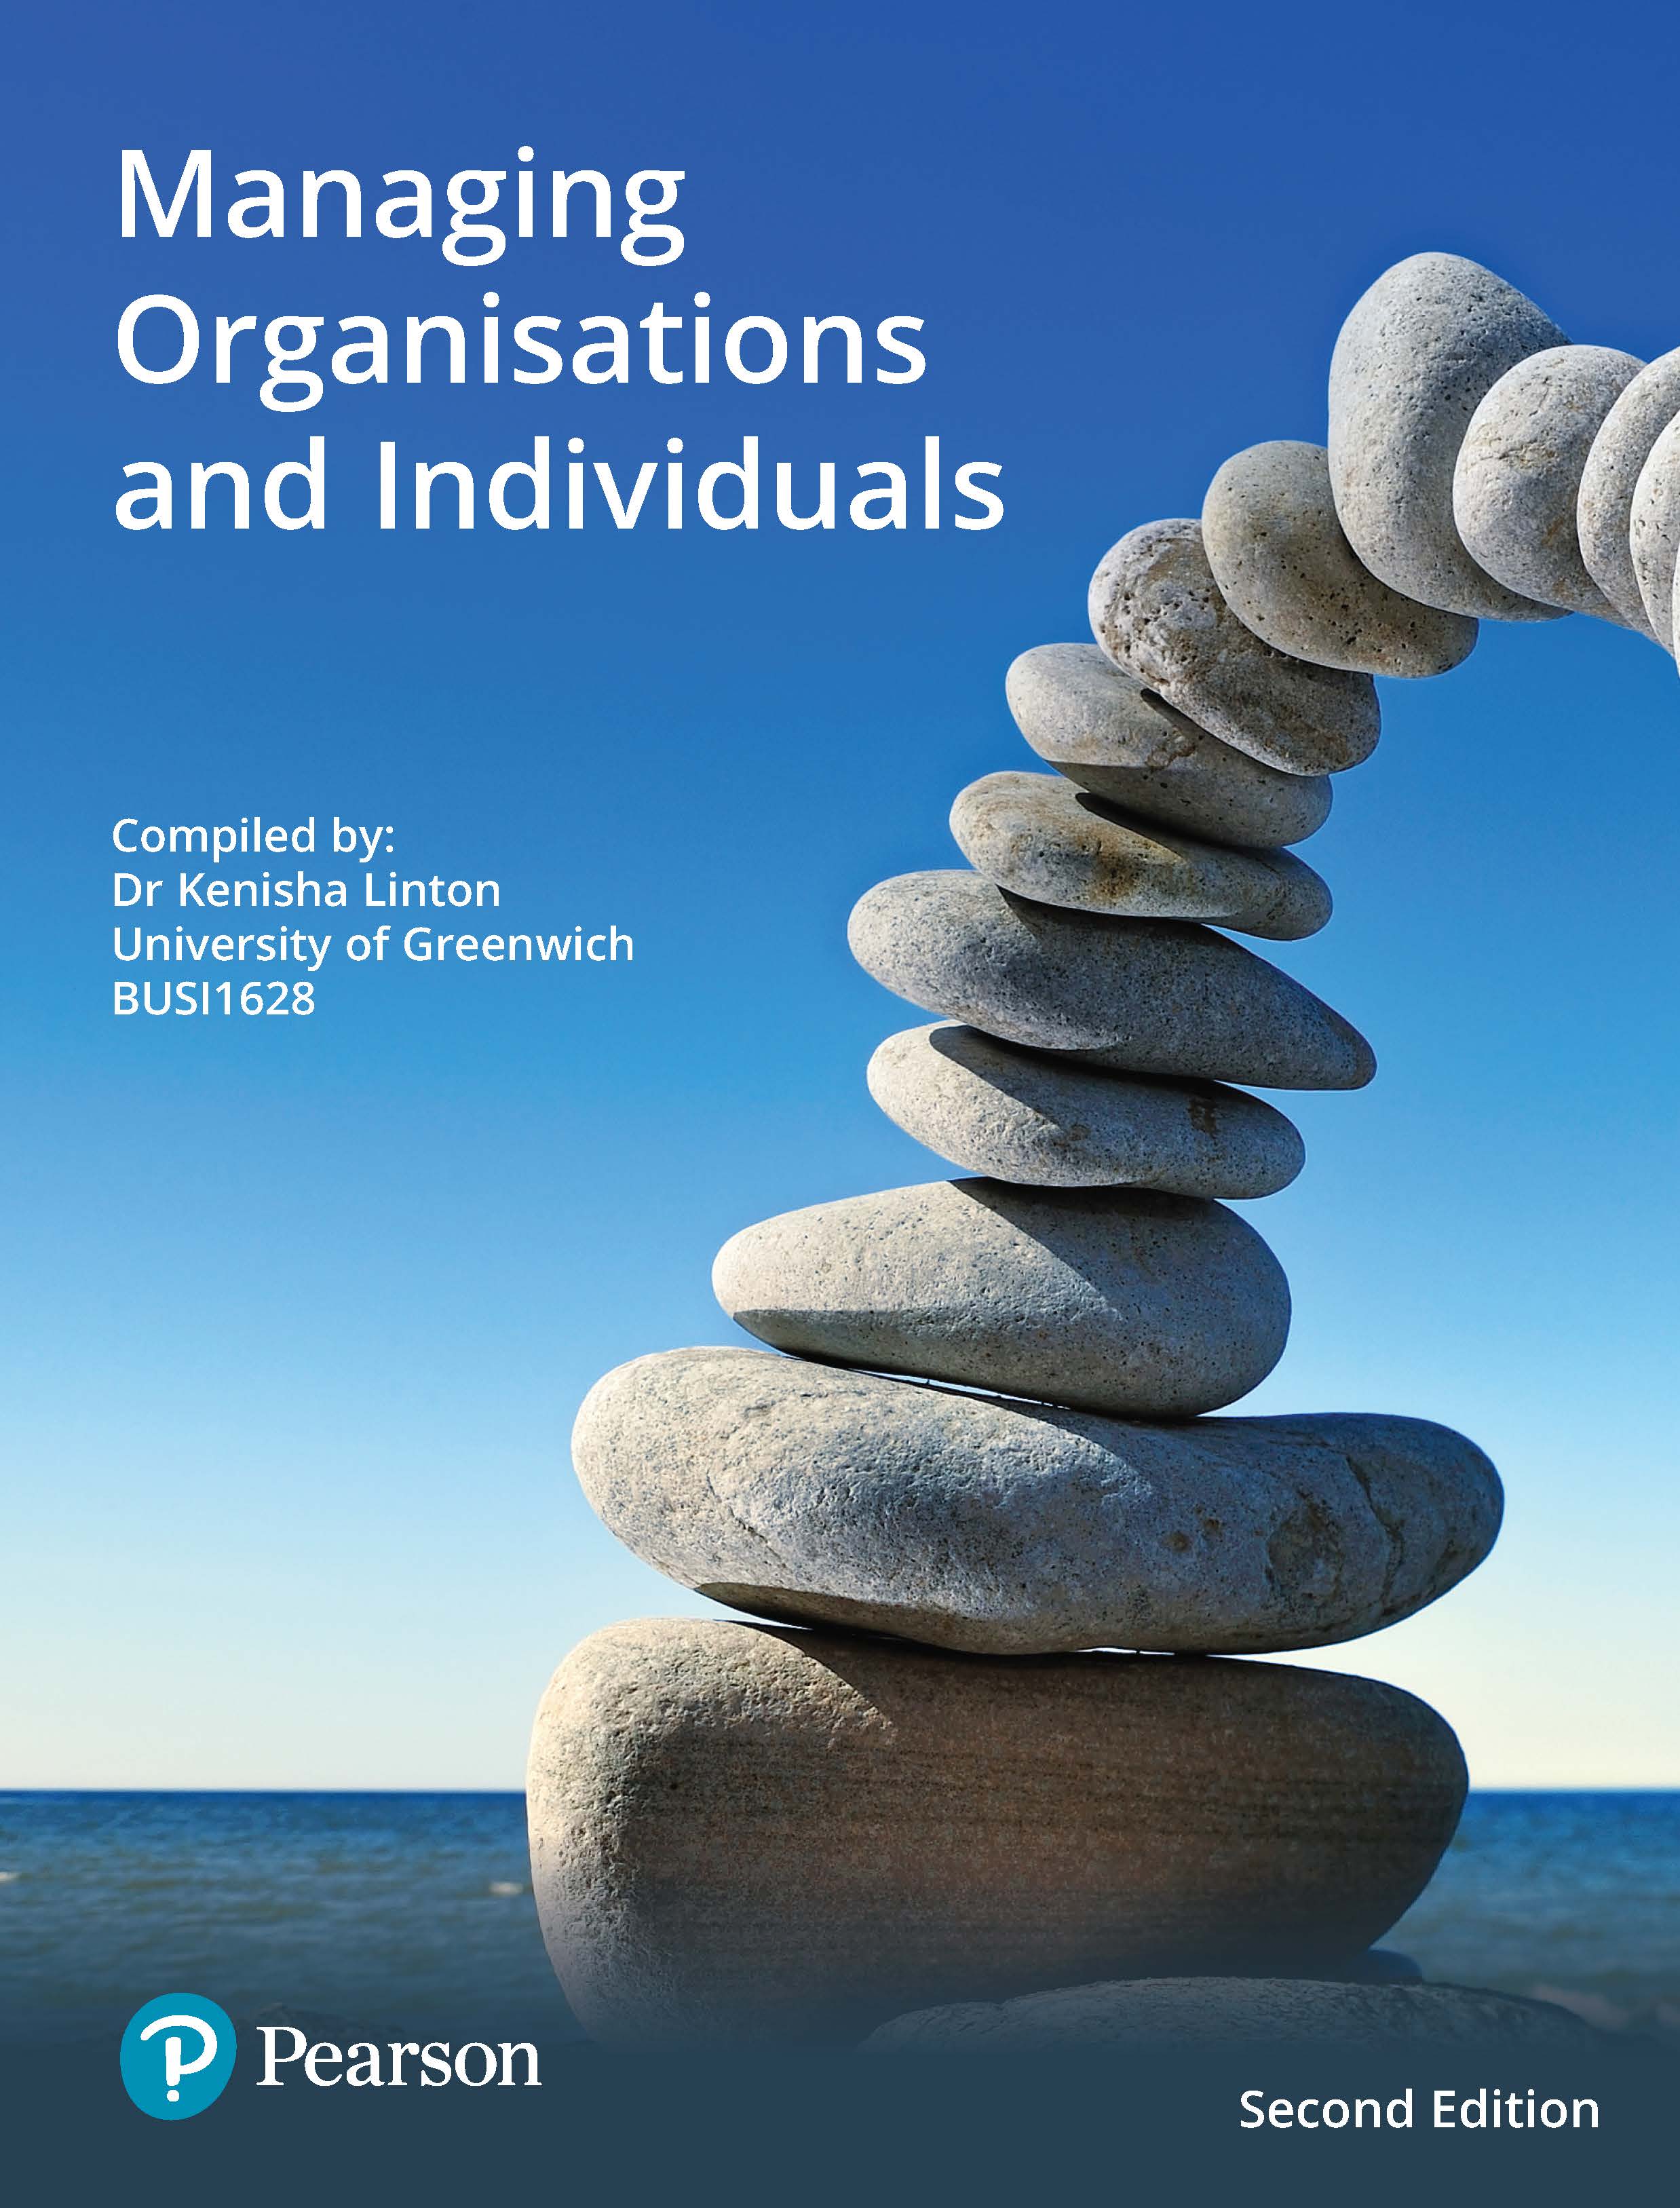 Managing Organisations and Individuals Custom Textbook: Exclusive for Students at Greenwich University